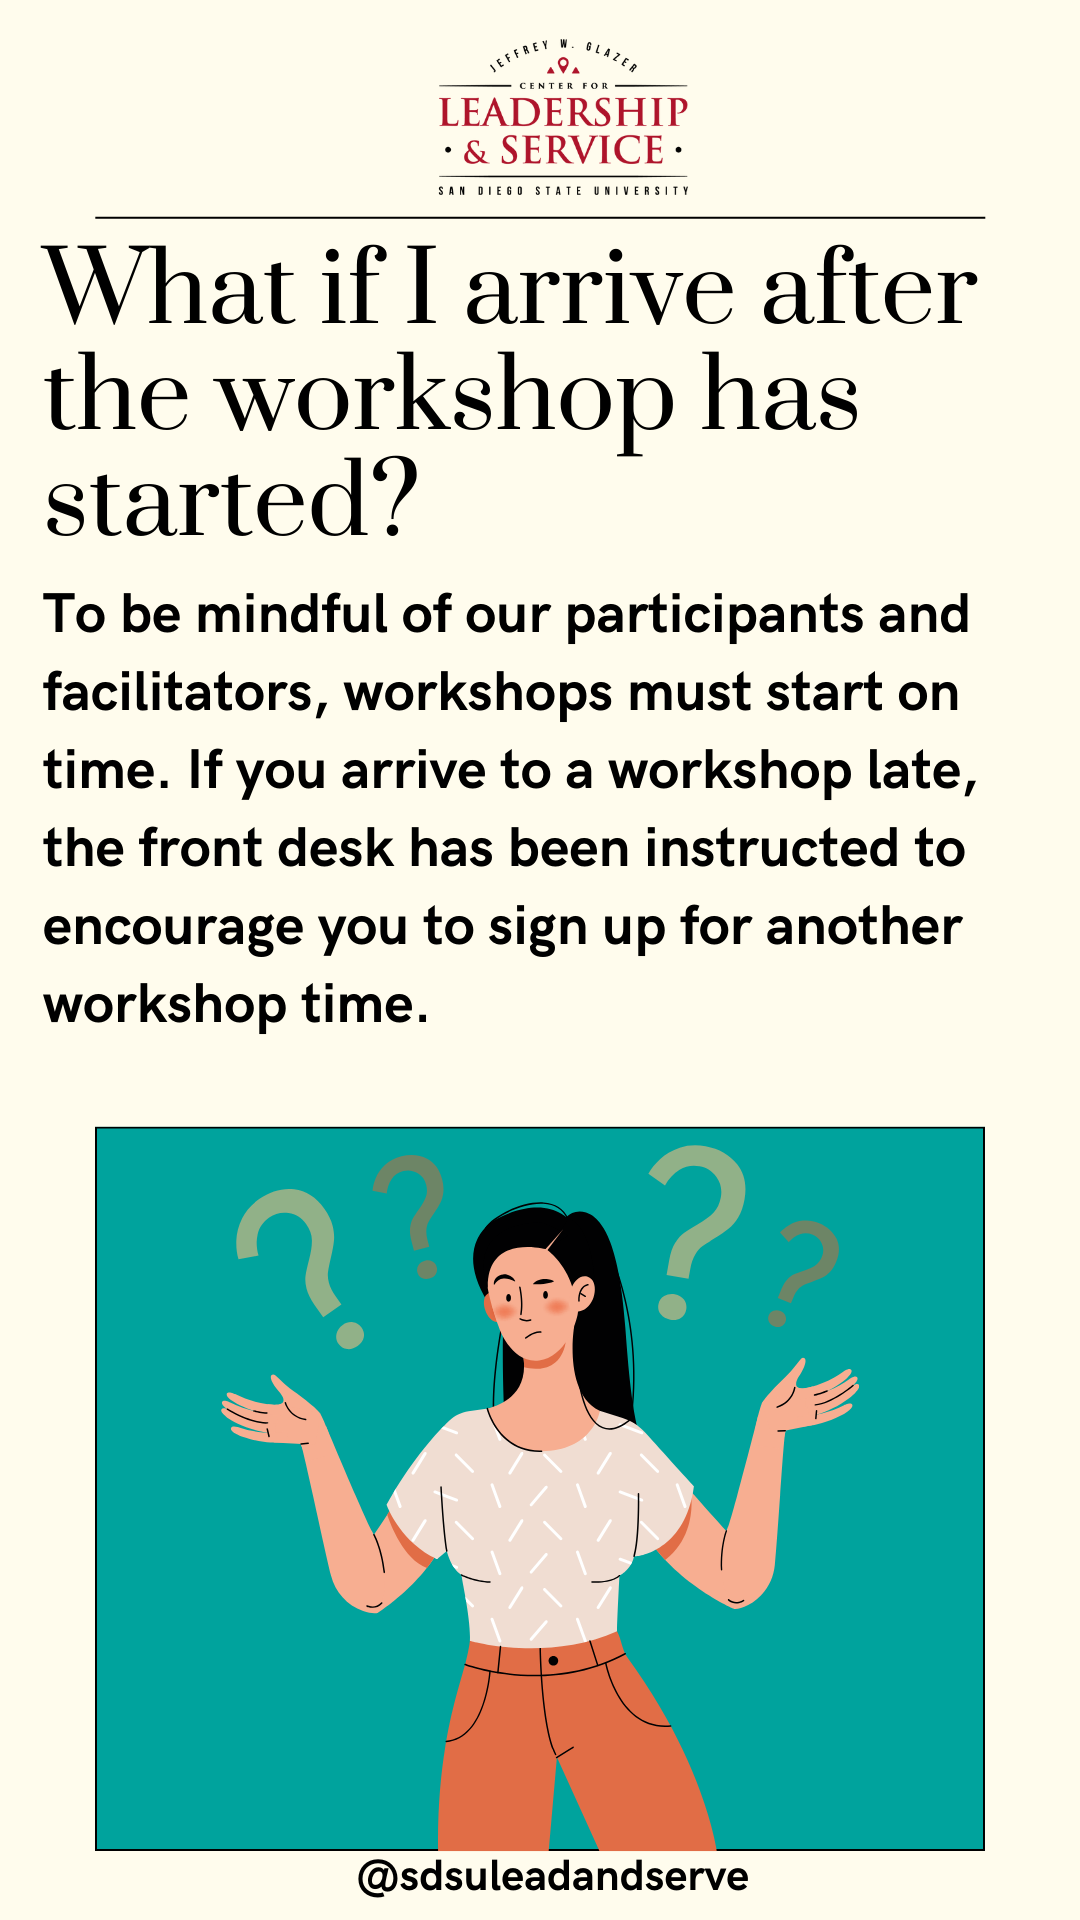 What if I arrive after the workshop has started? To be mindful of our participants and facilitators, workshops must start on time. If you arrive to a workshop late, the front desk has been instructed to encourage you to sign up for another workshop time.